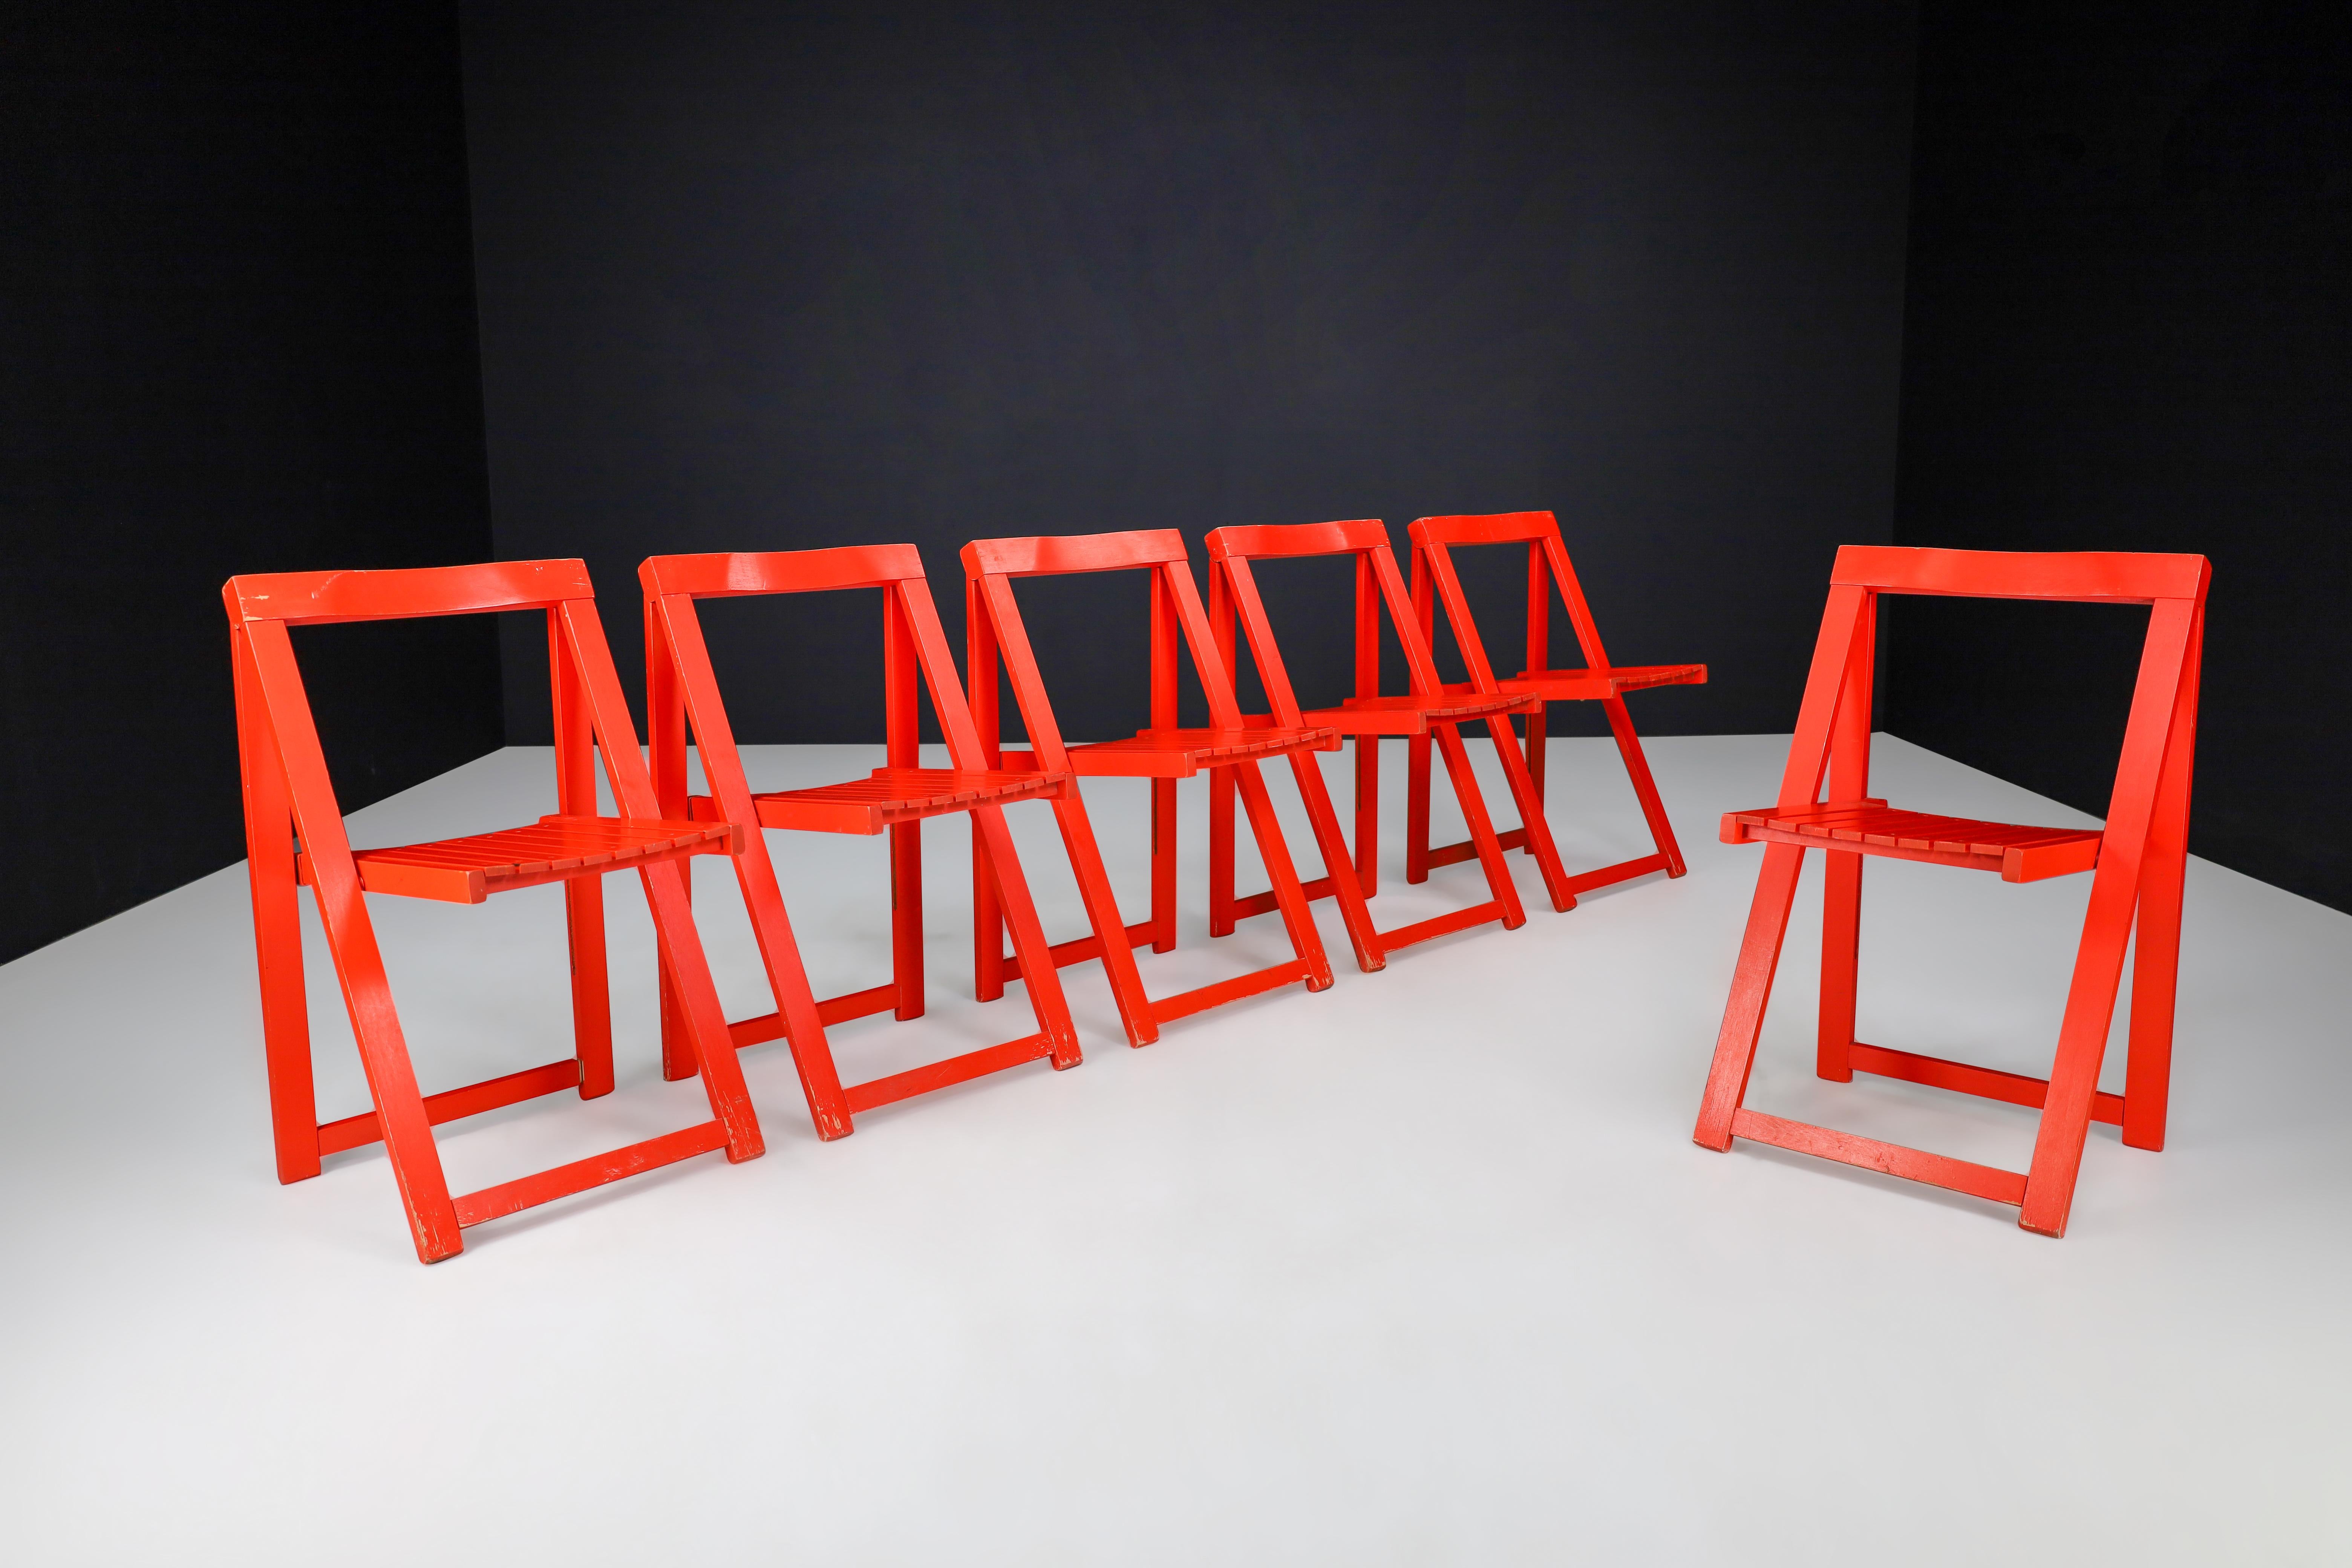 Aldo Jacober for Alberto Bazzani Red Painted Folding Chairs, Italy, 1960

These 12 folding chairs are made of high-quality beechwood with a patinated finish and painted in a striking shade of red. They were designed by Aldo Jacober, a